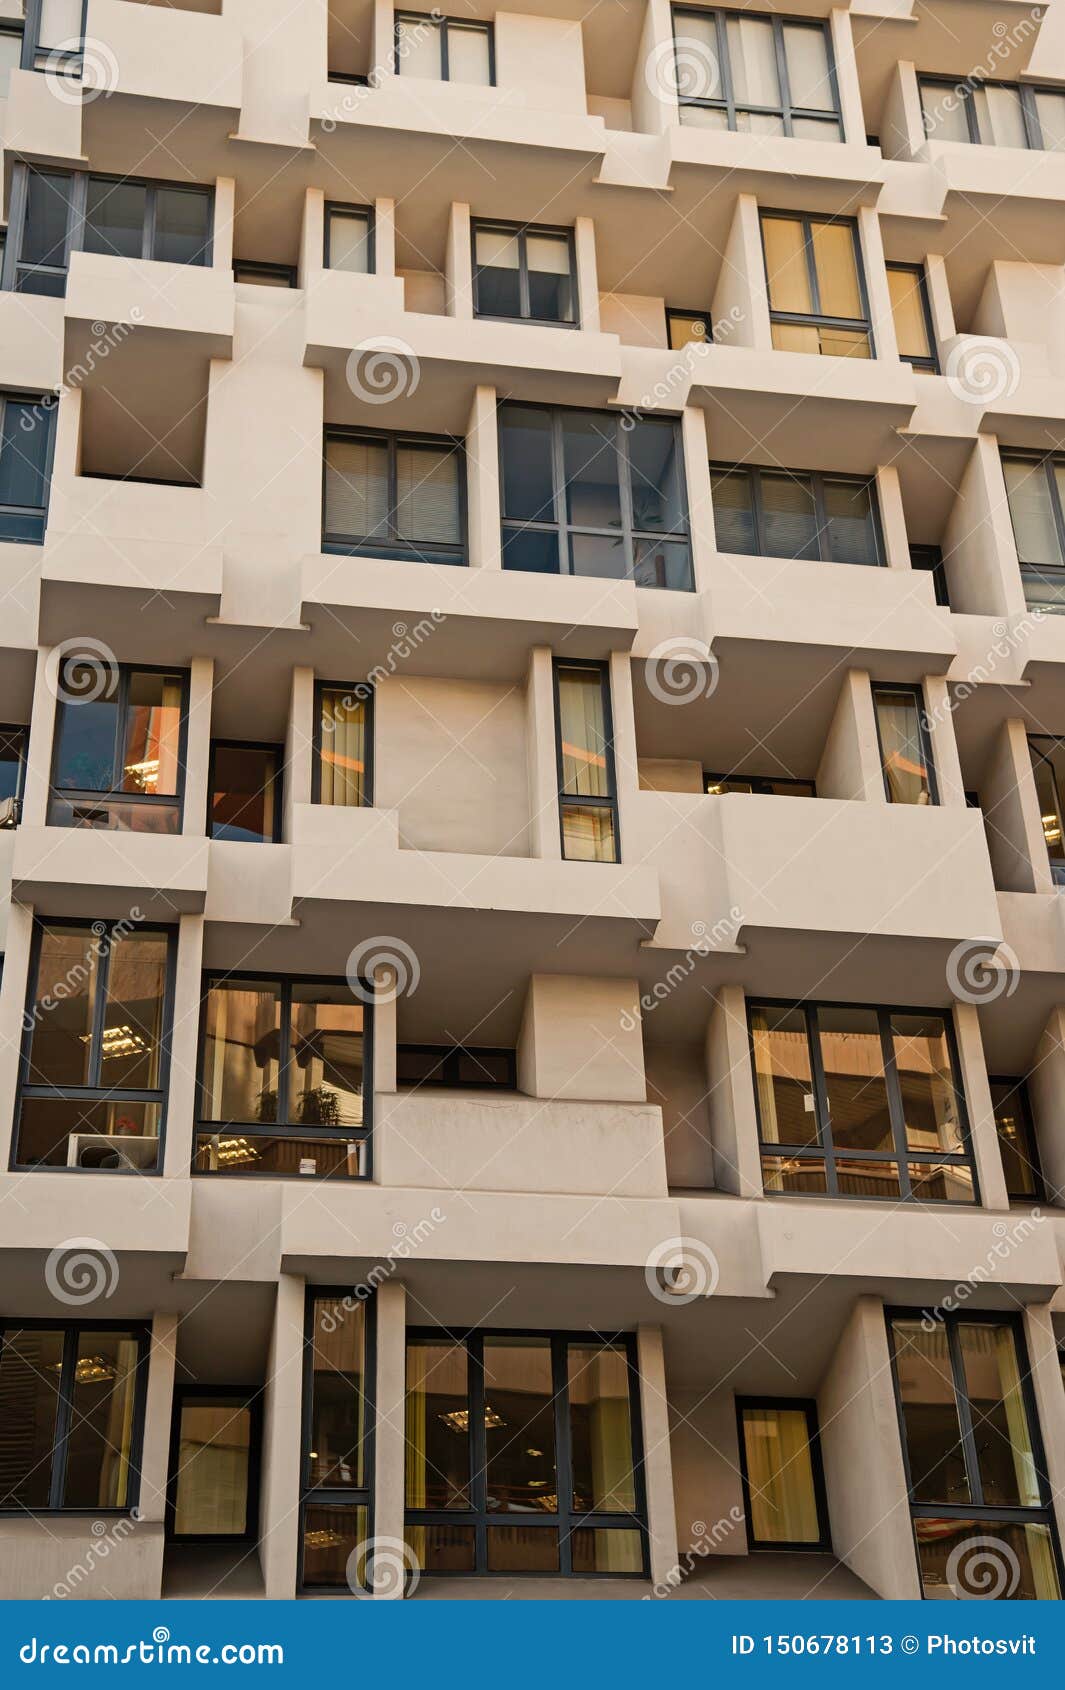 Building Facade With Windows Apartment House Or Residential Real